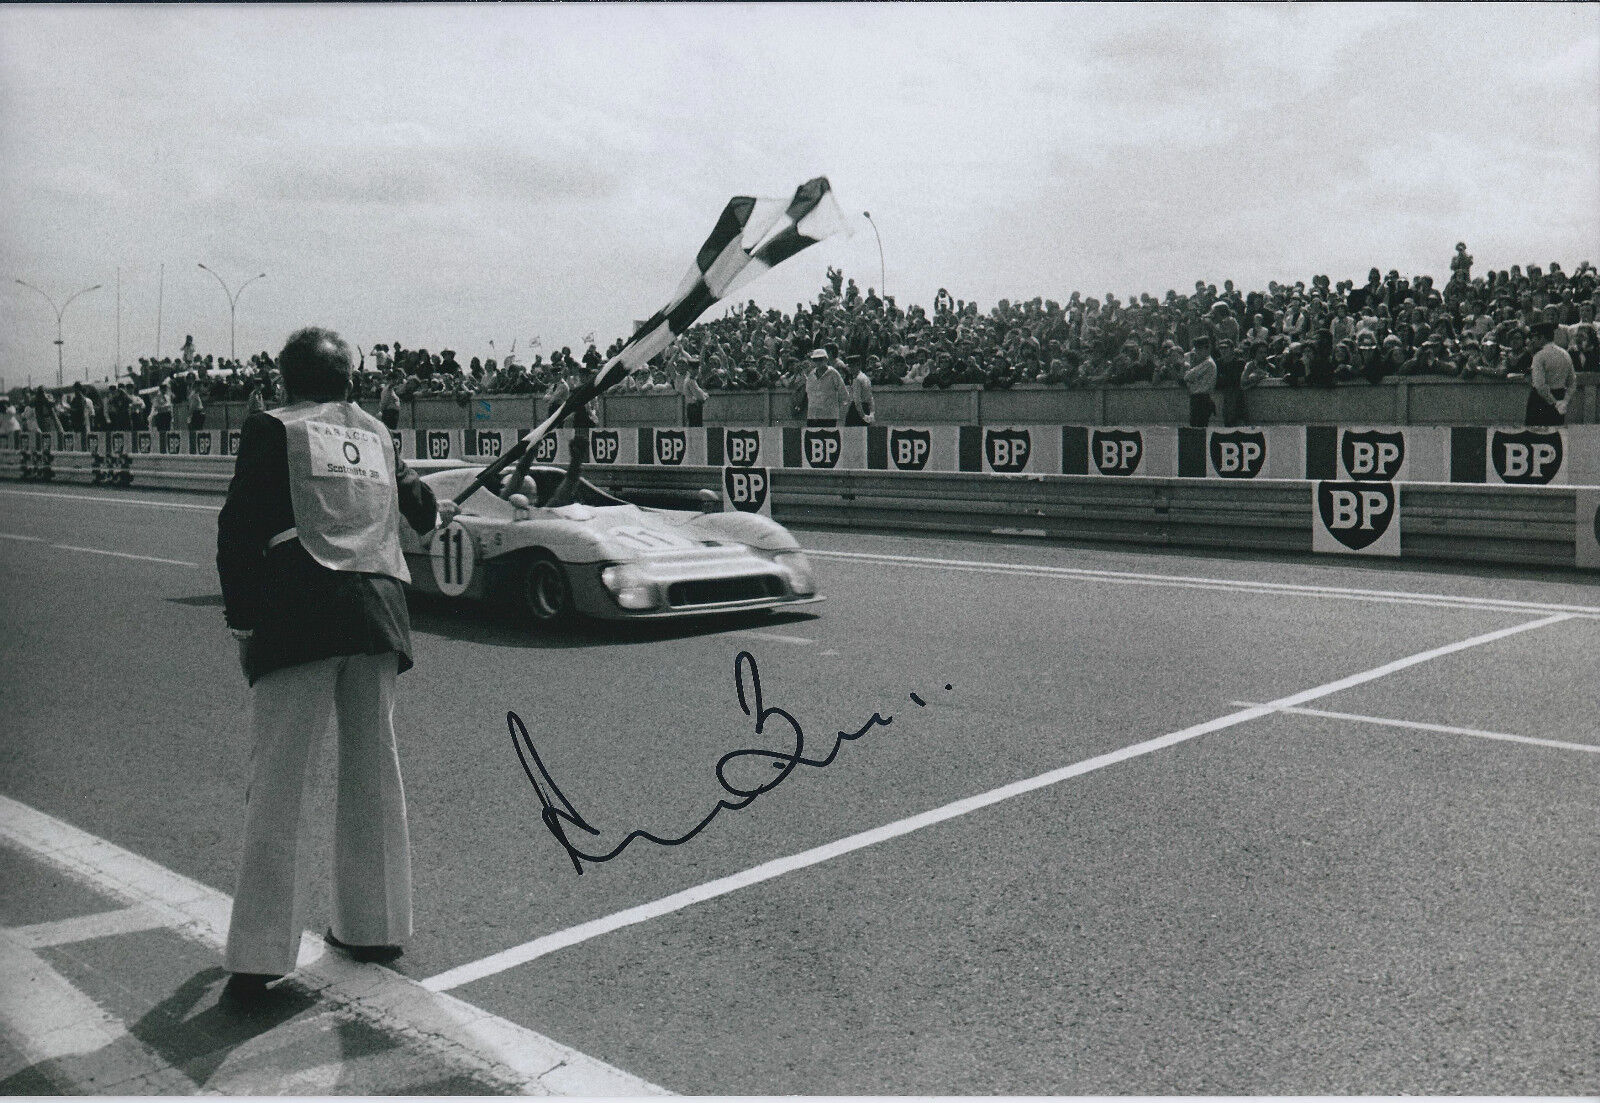 Derek BELL Signed 12x8 Photo Poster painting Autograph AFTAL COA Ford Cosworth Gulf Le Mans 24hr